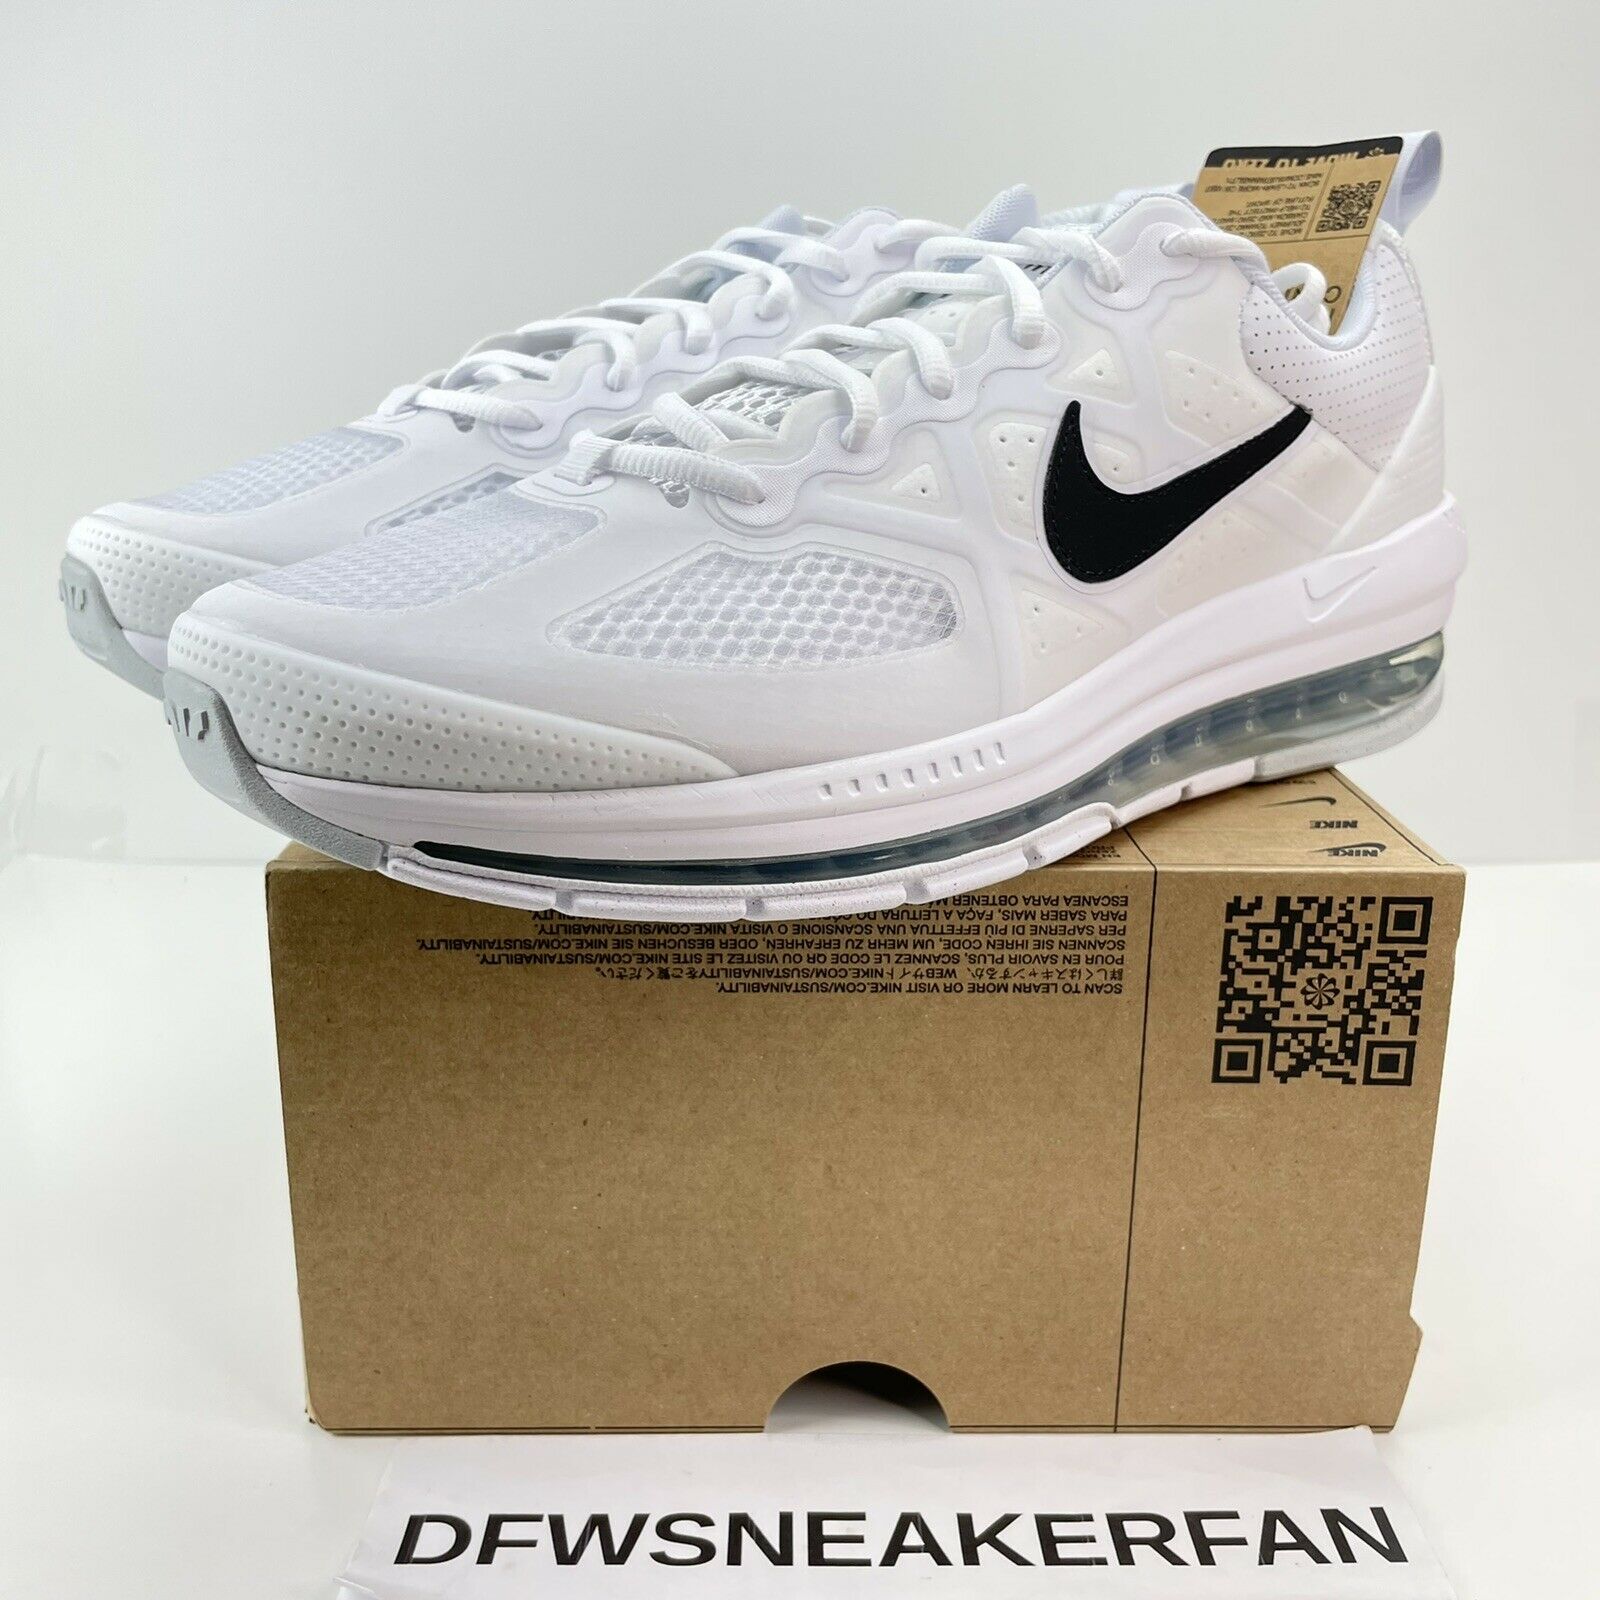 Nike Air Max Genome White Pure Platinum Running Shoes CW1648-100 Men’s 13 New